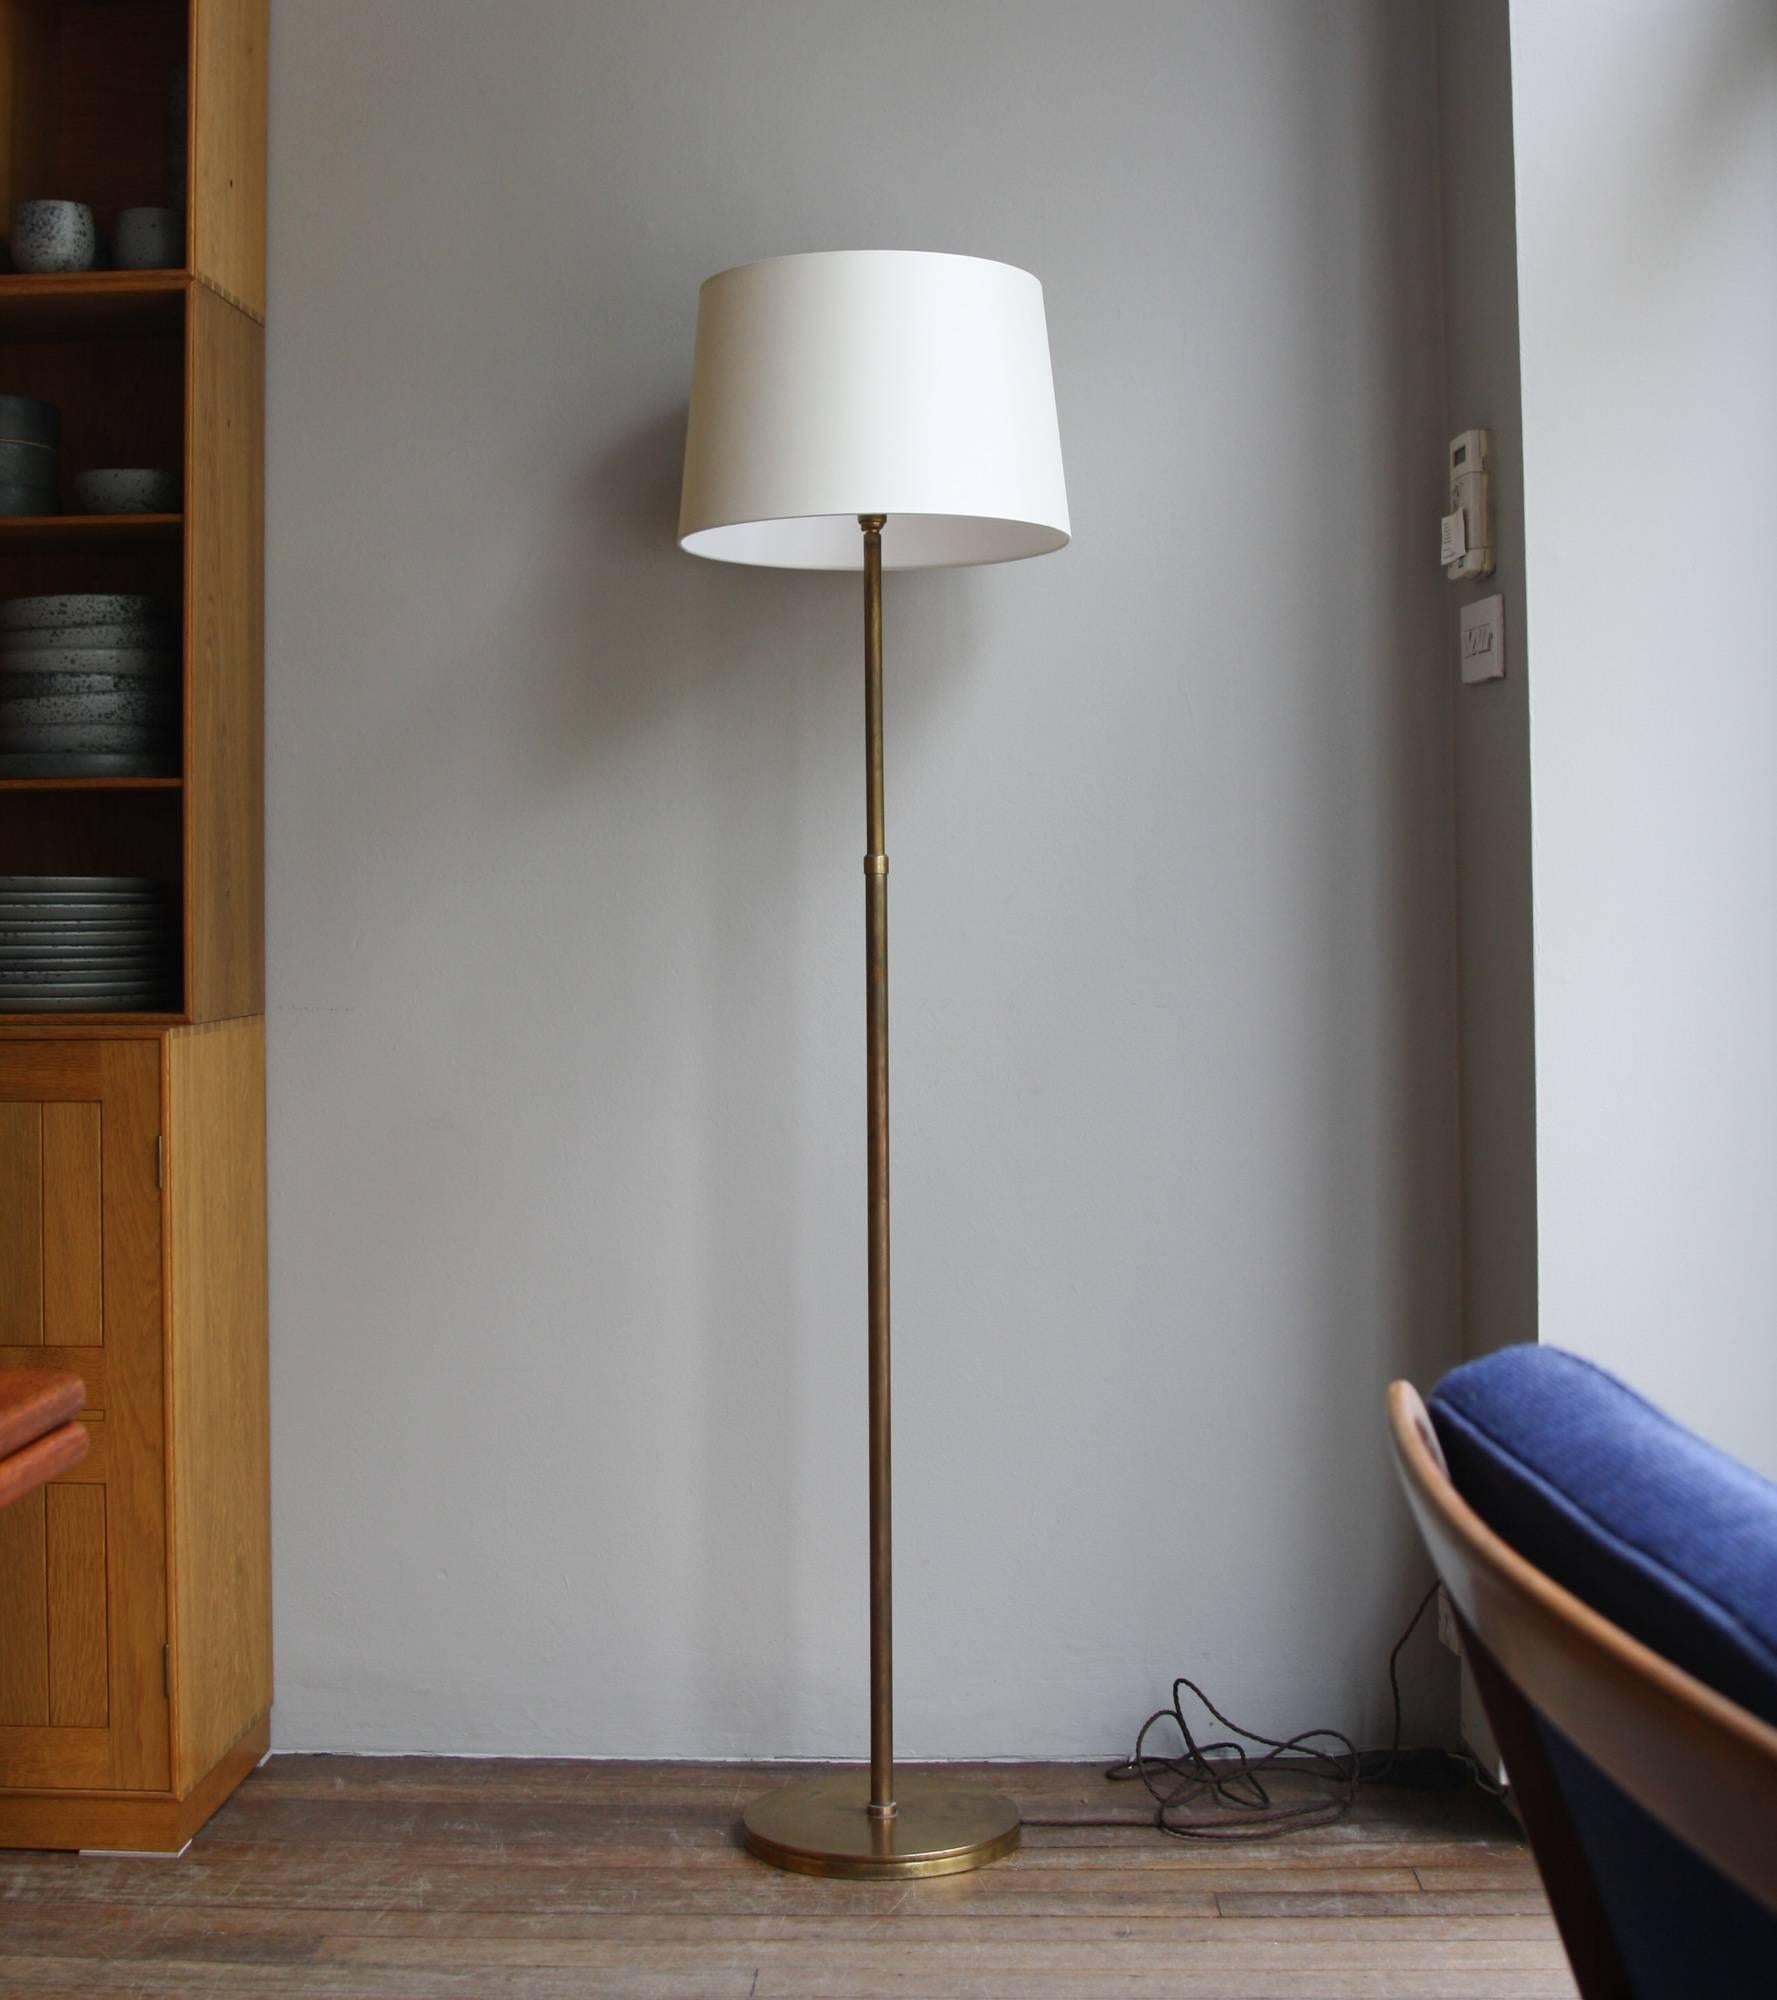 A vintage floor lamp, Denmark 1950s. 
The telescopic stem makes the height of the lamp vary from 126 to 174 cm.
In brass covered with a warm consistent patina.
In over all good condition.